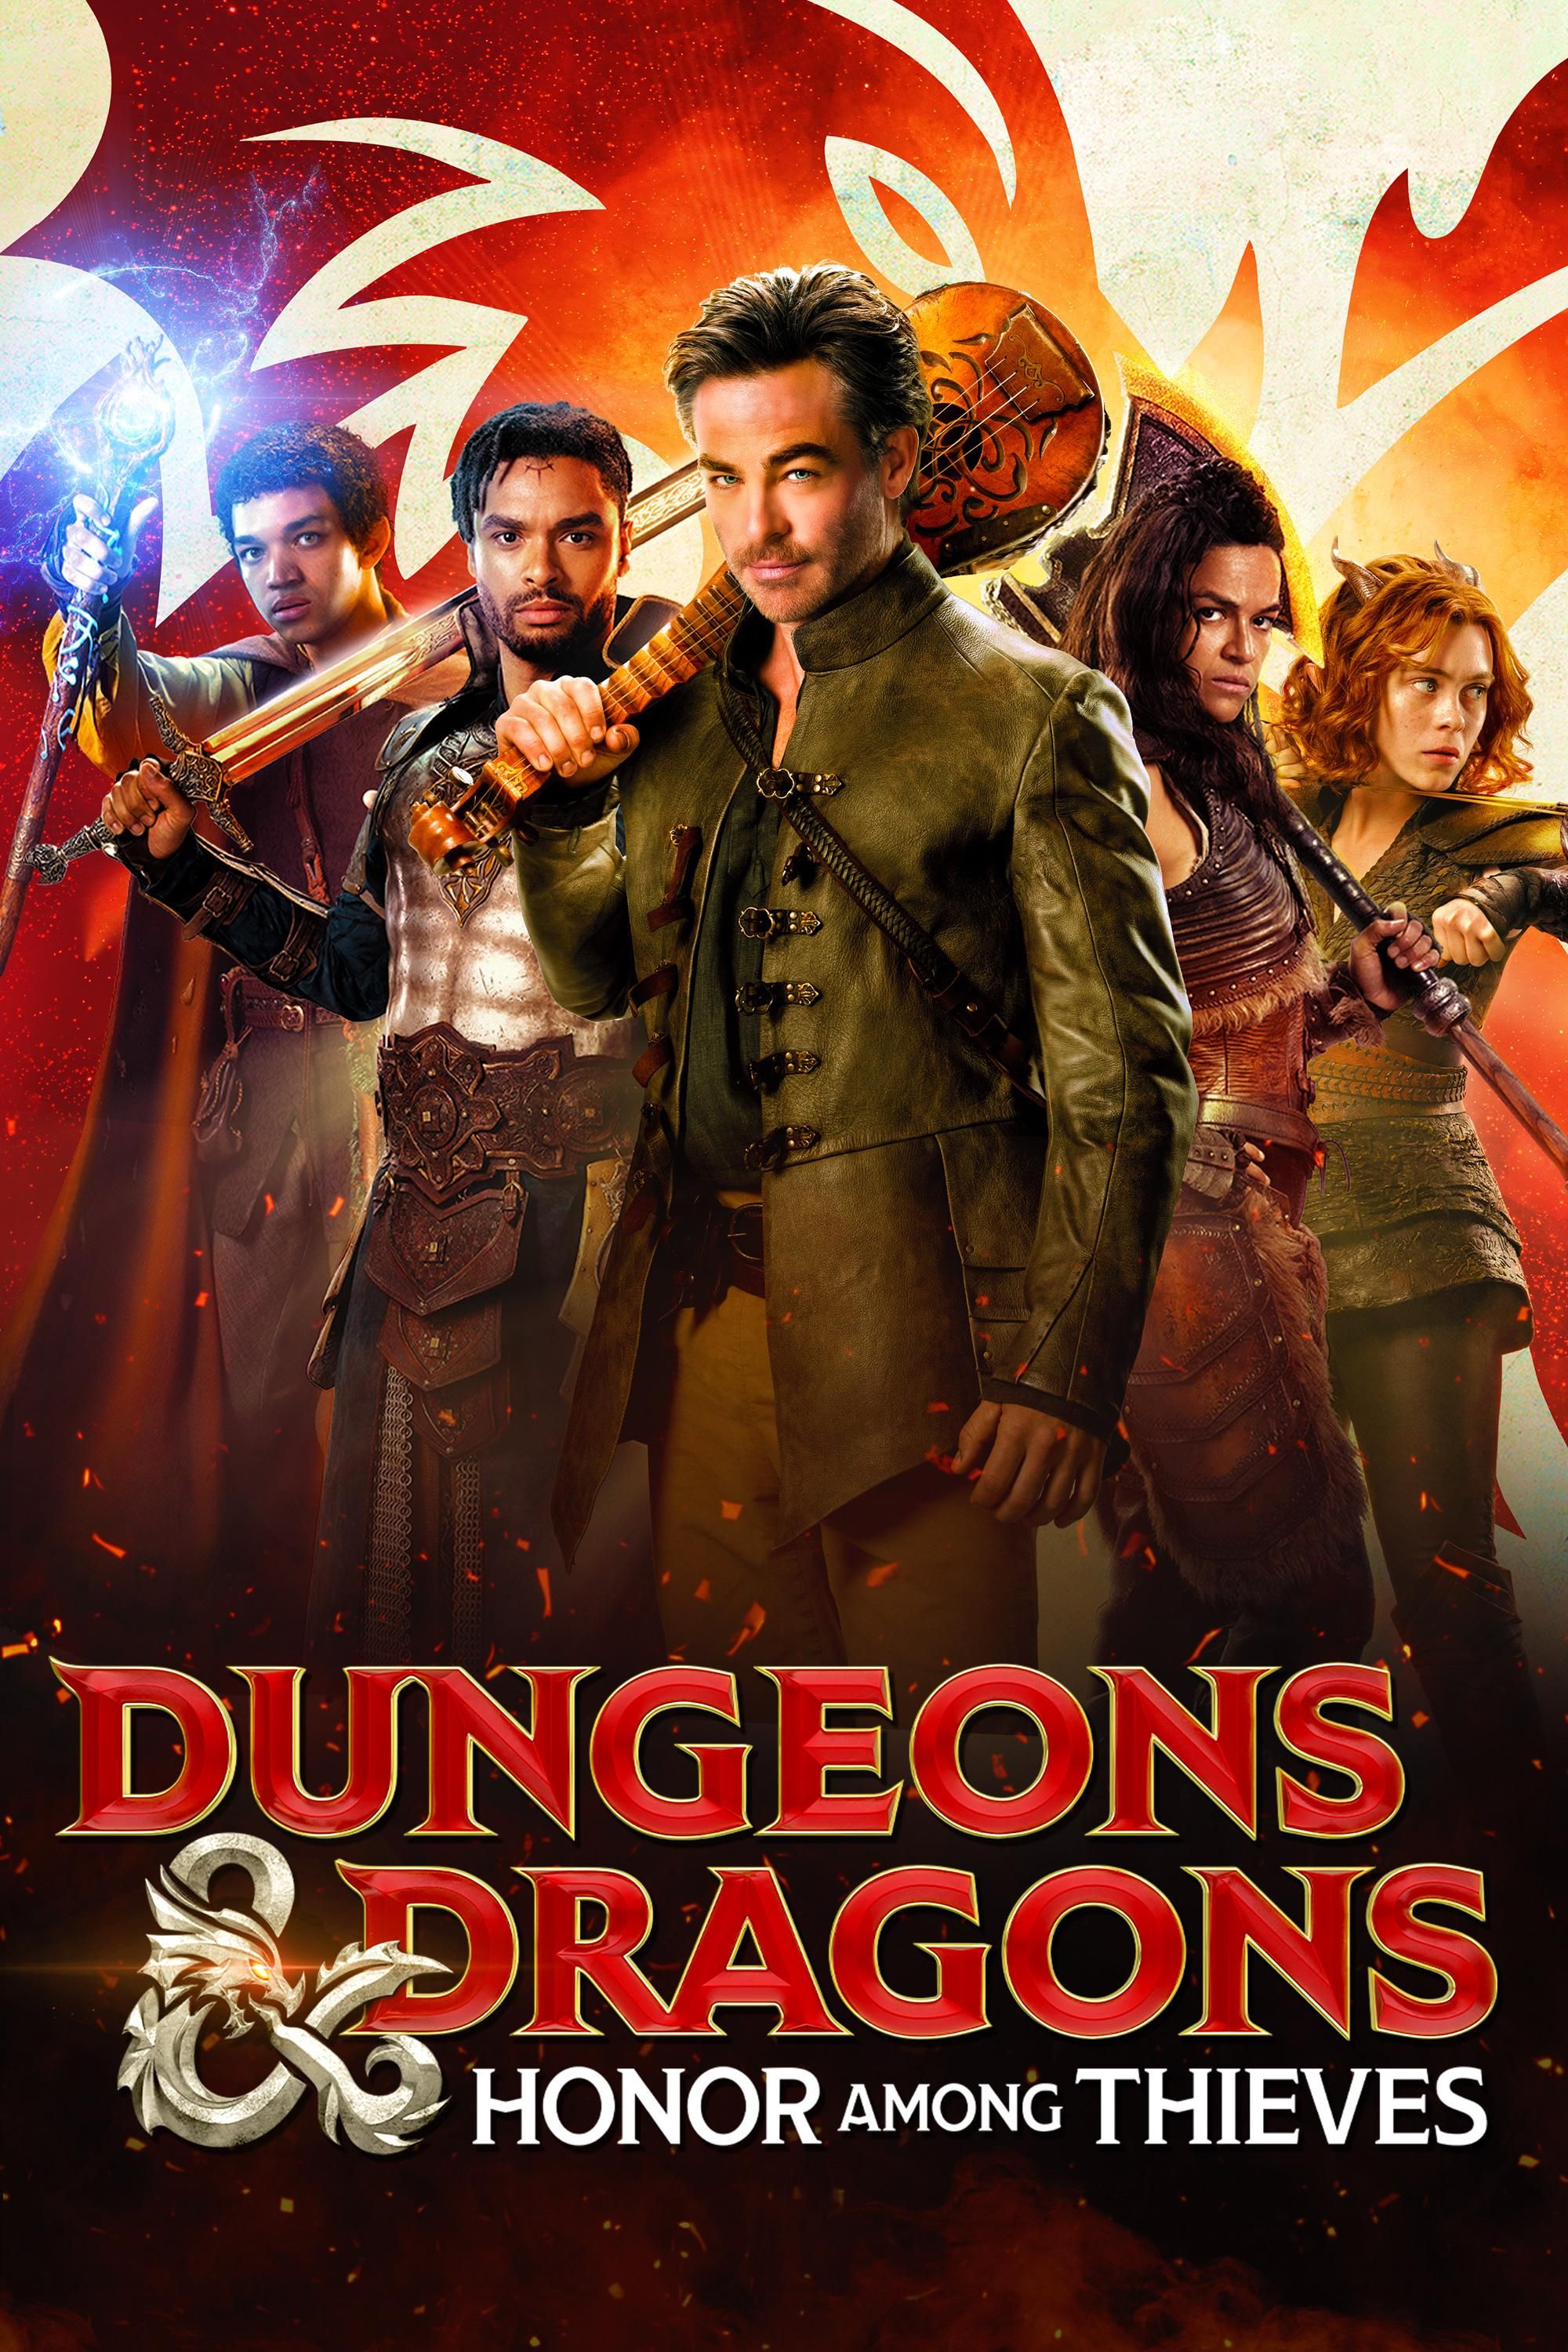 Dungens & Dragons: Honor amoungst thieves